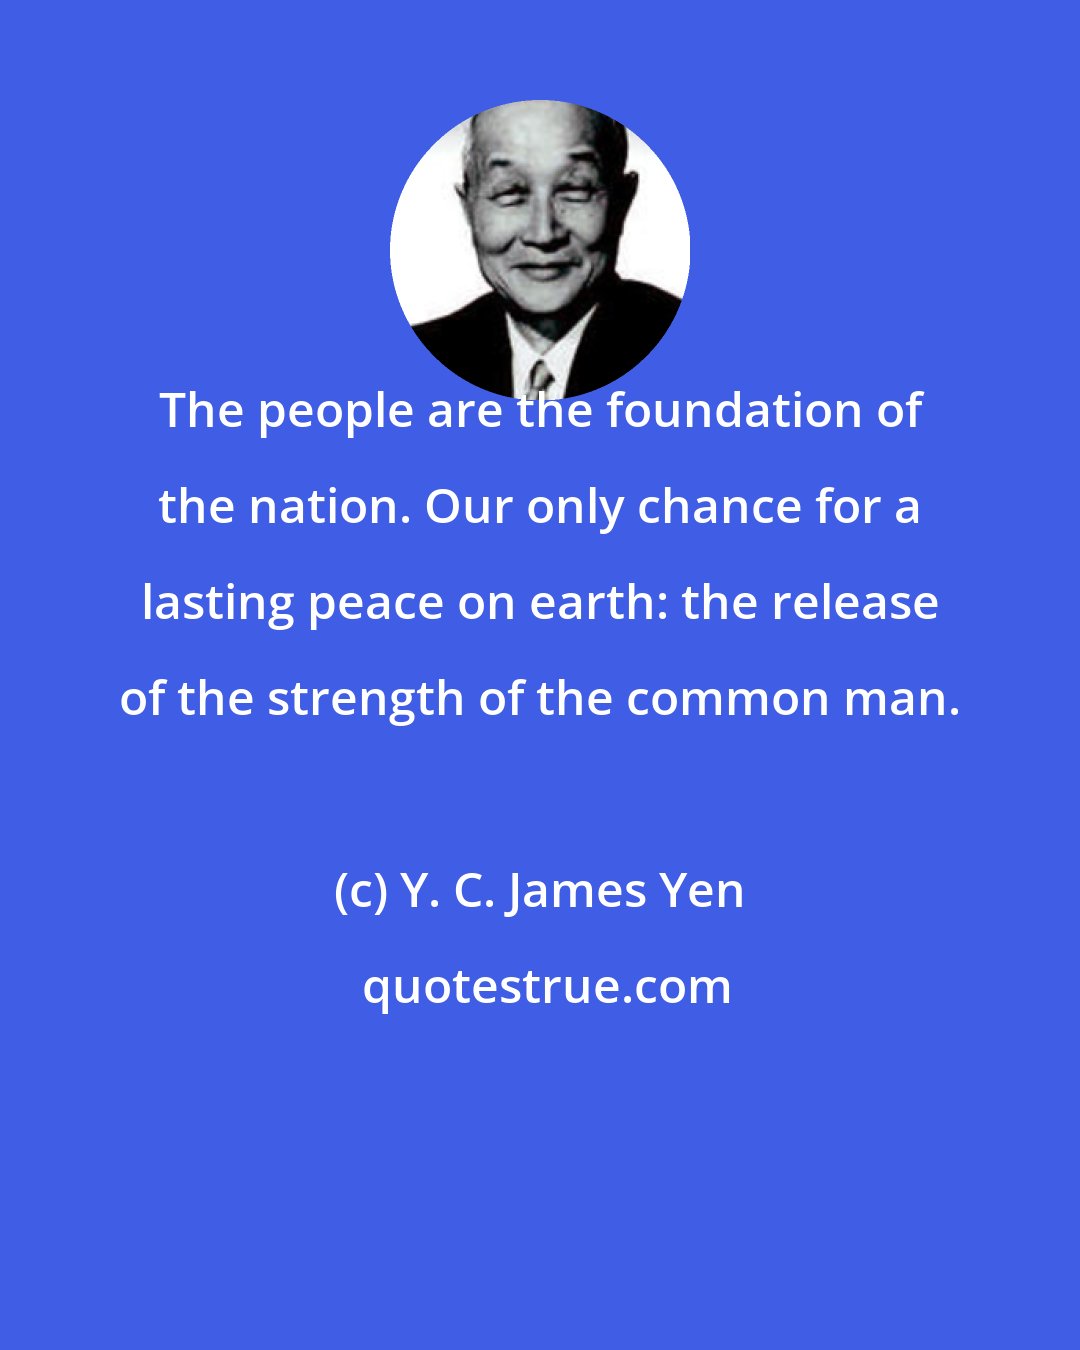 Y. C. James Yen: The people are the foundation of the nation. Our only chance for a lasting peace on earth: the release of the strength of the common man.